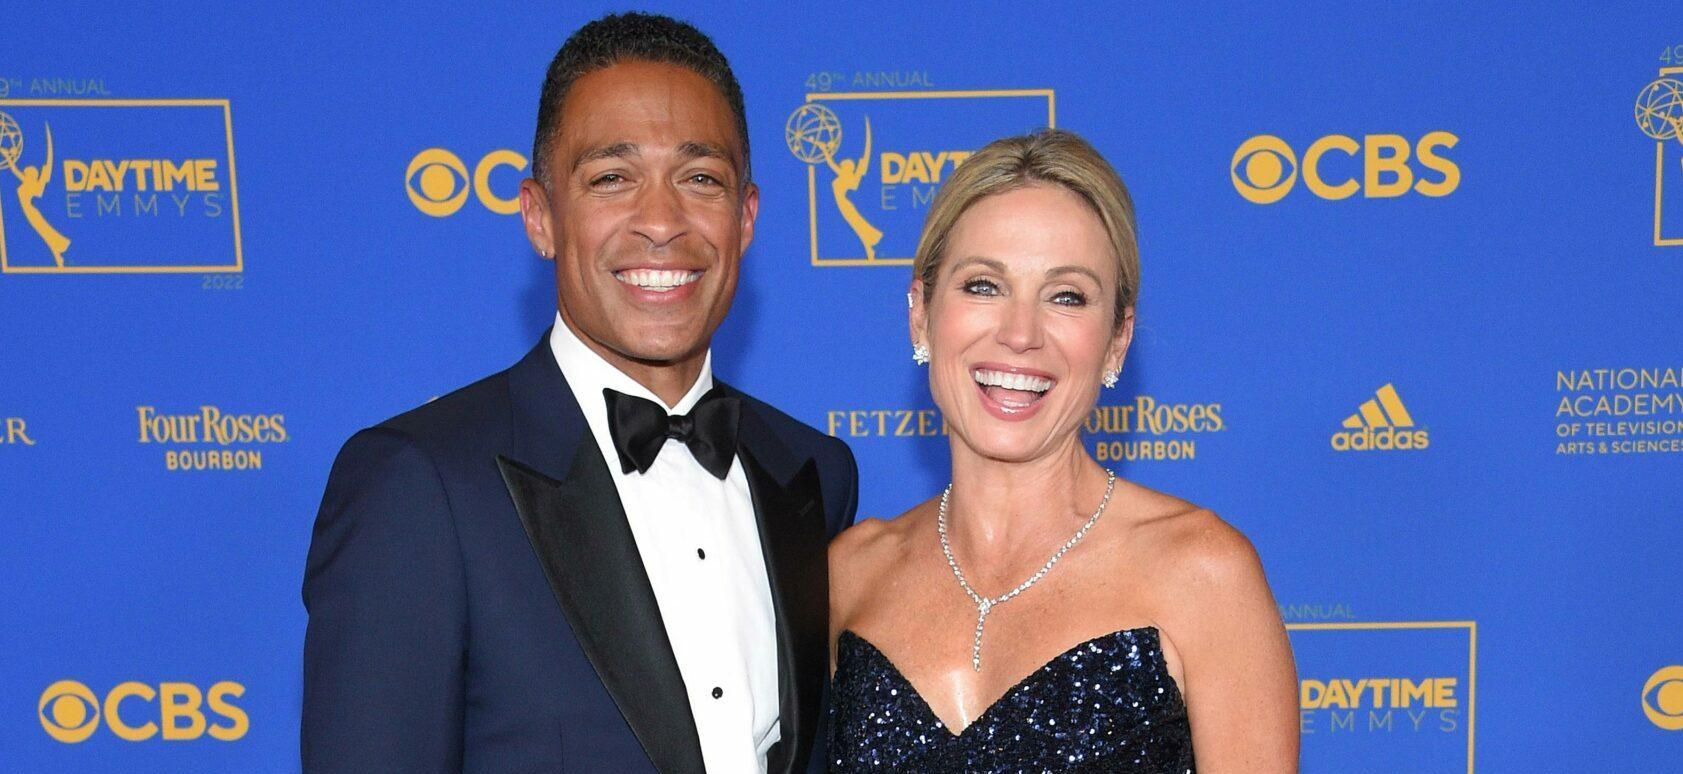 Amy Robach, T.J. Holmes Going Full Steam Ahead With Romance